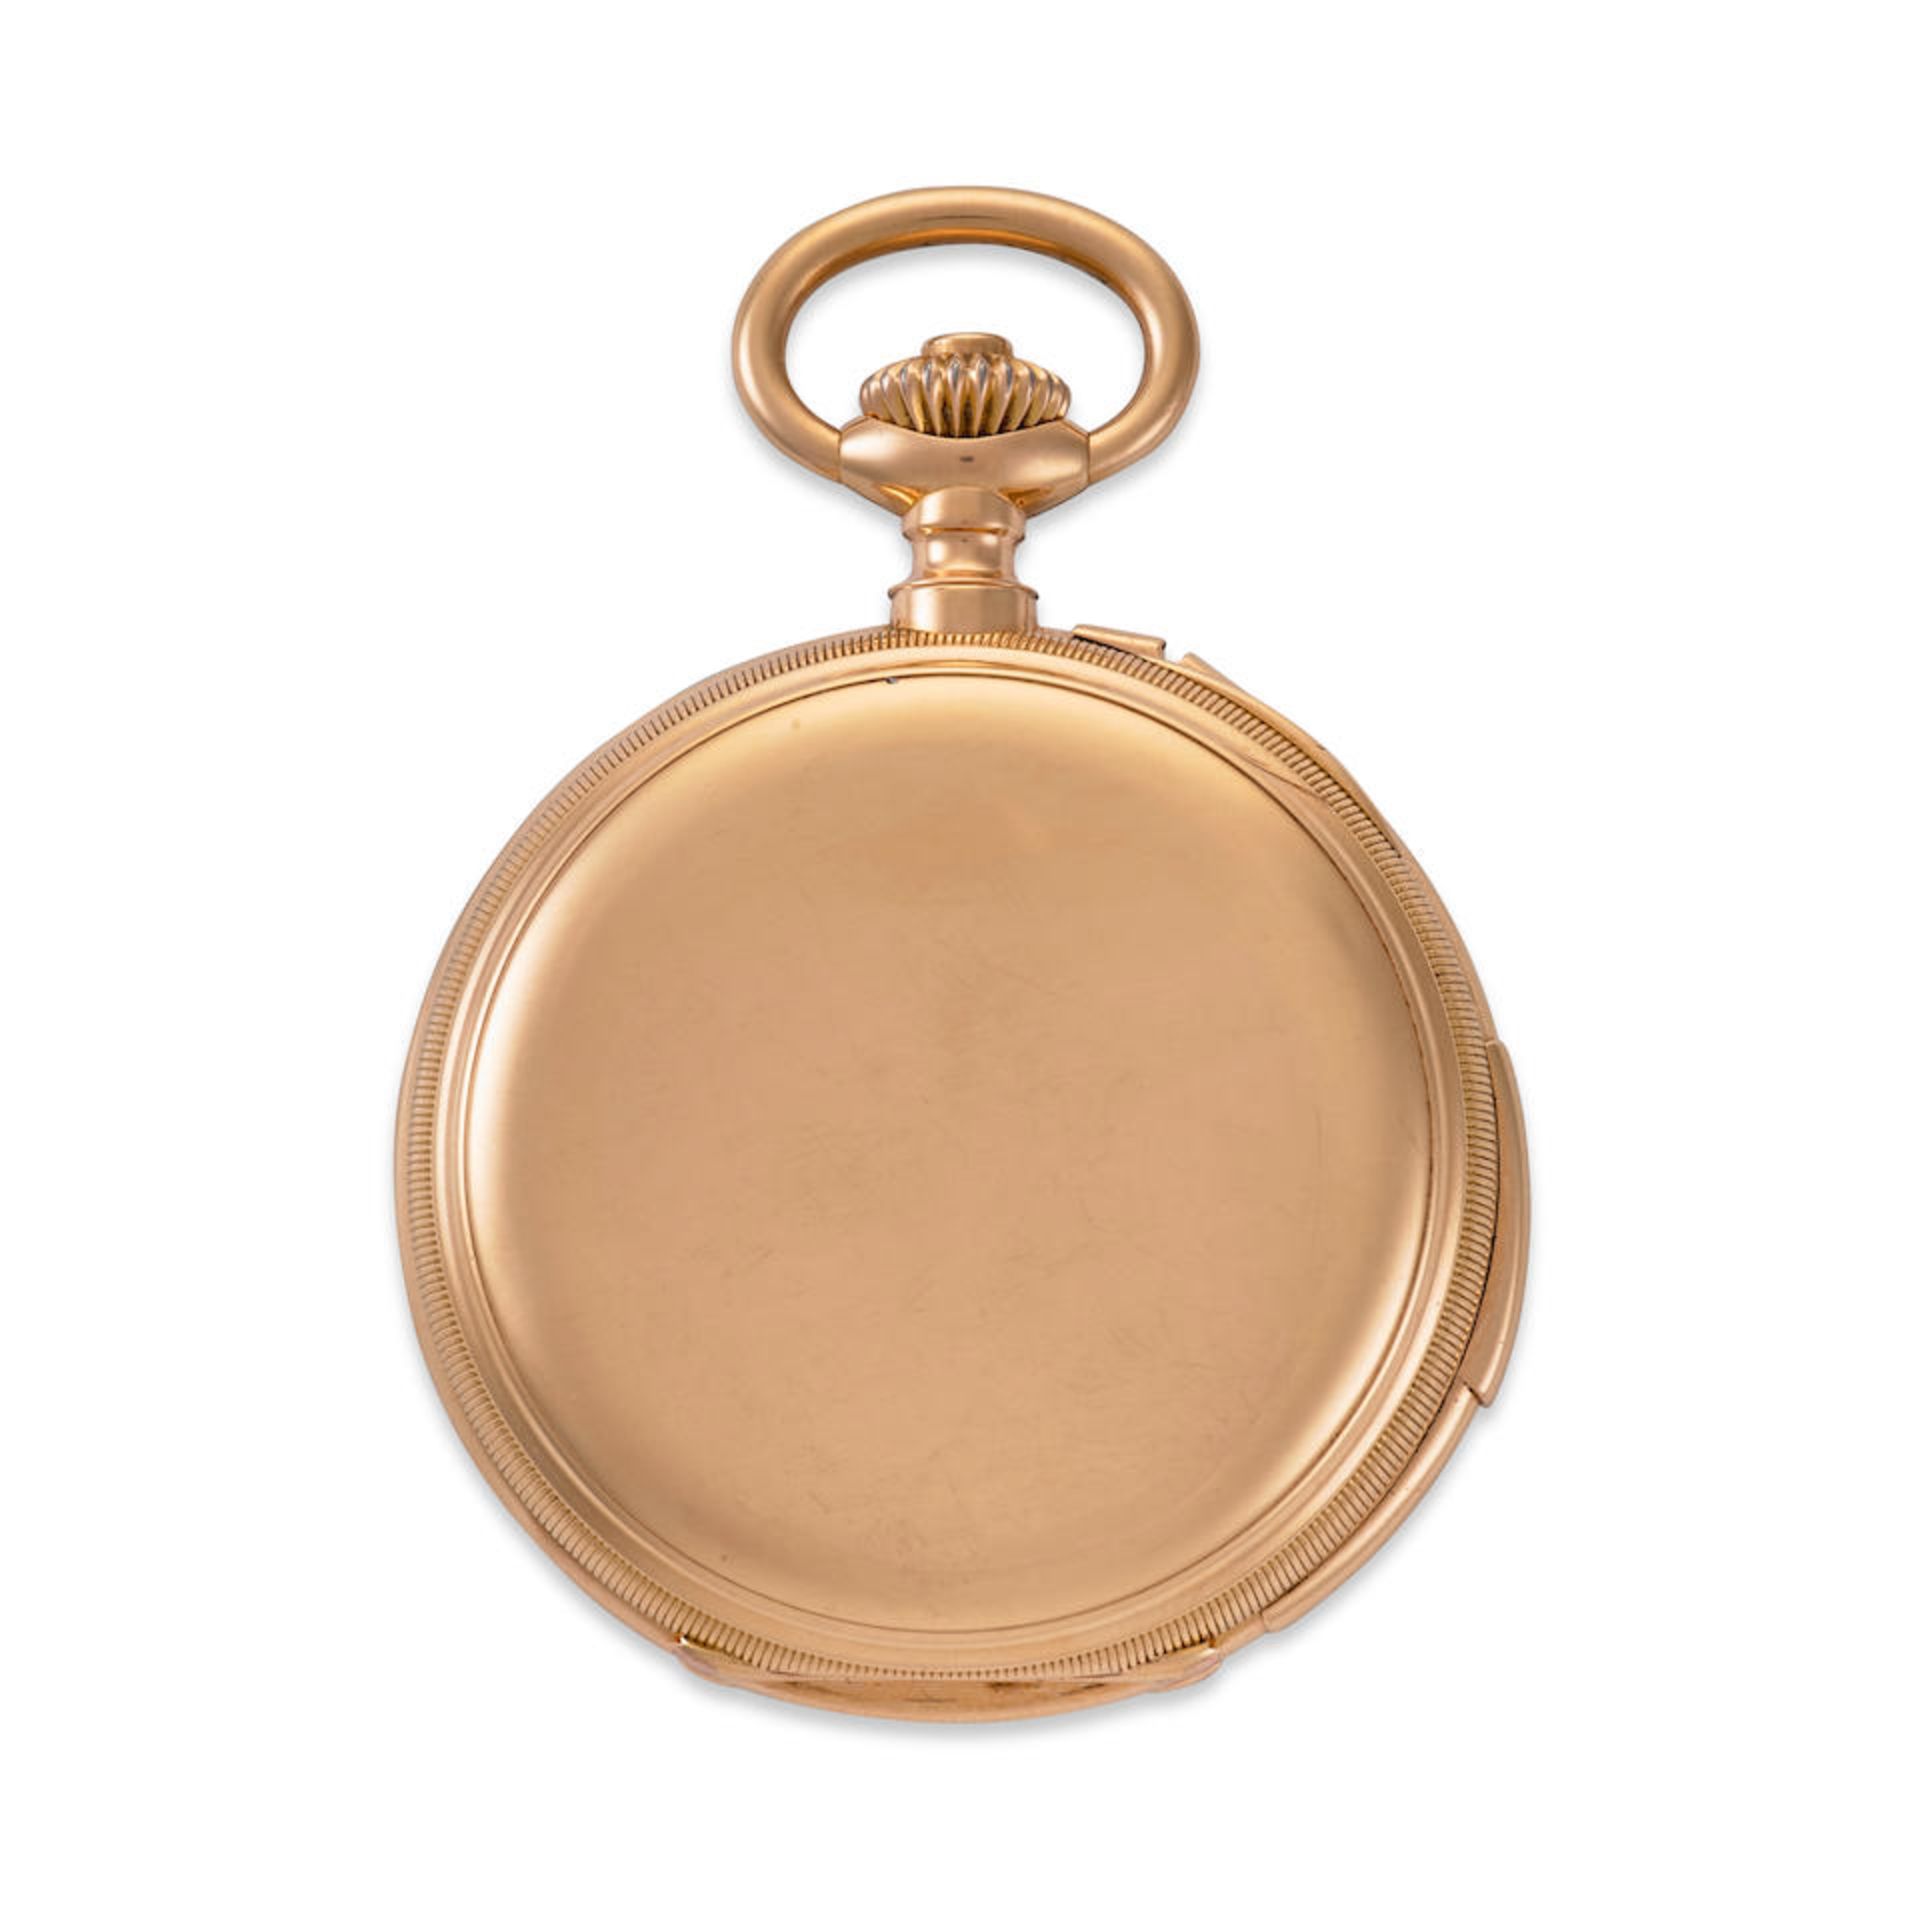 PATEK PHILIPPE & CO., GENEVA. A FINE 18K GOLD OPENFACE FIVE MINUTE REPEATING CHRONOGRAPHc. 1883 - Image 3 of 4